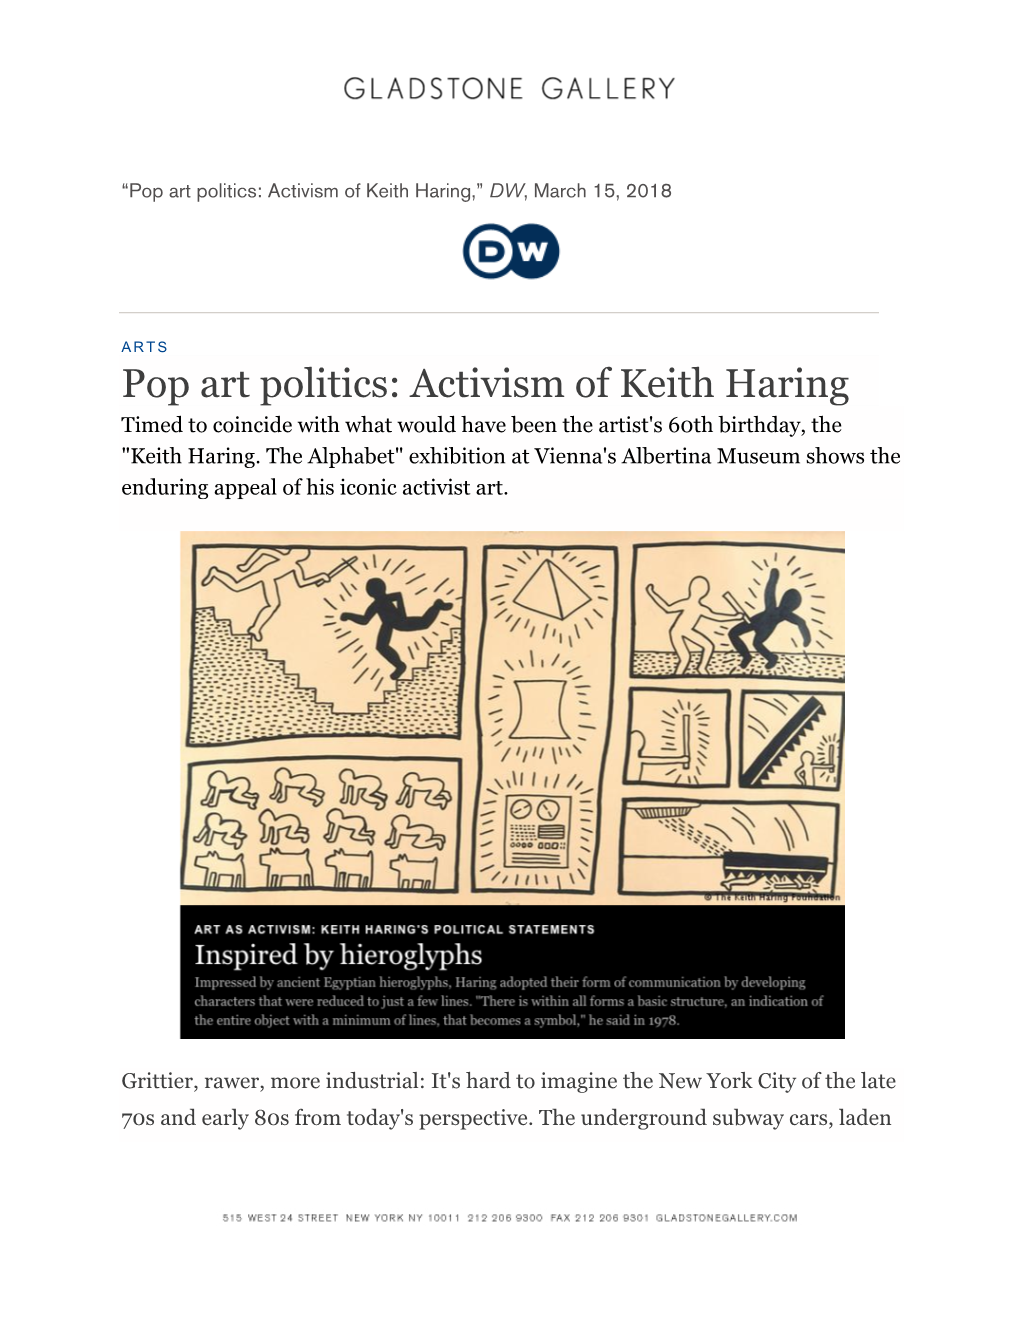 Activism of Keith Haring,” DW, March 15, 2018